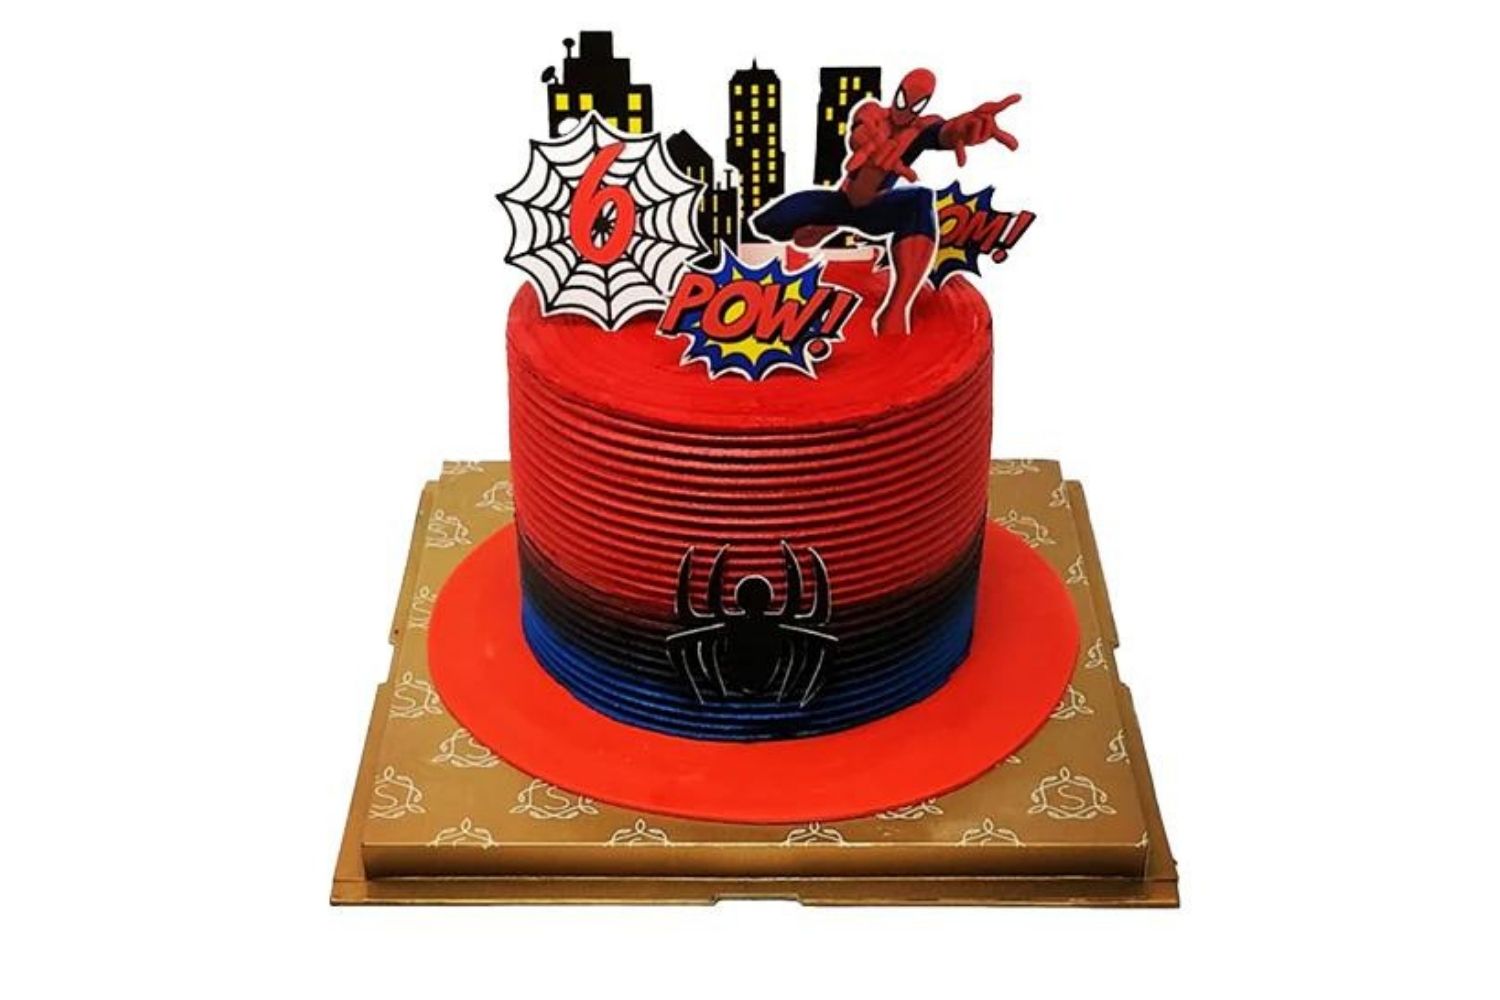 Simple spiderman cake - Hayley Cakes and Cookies Hayley Cakes and Cookies-mncb.edu.vn